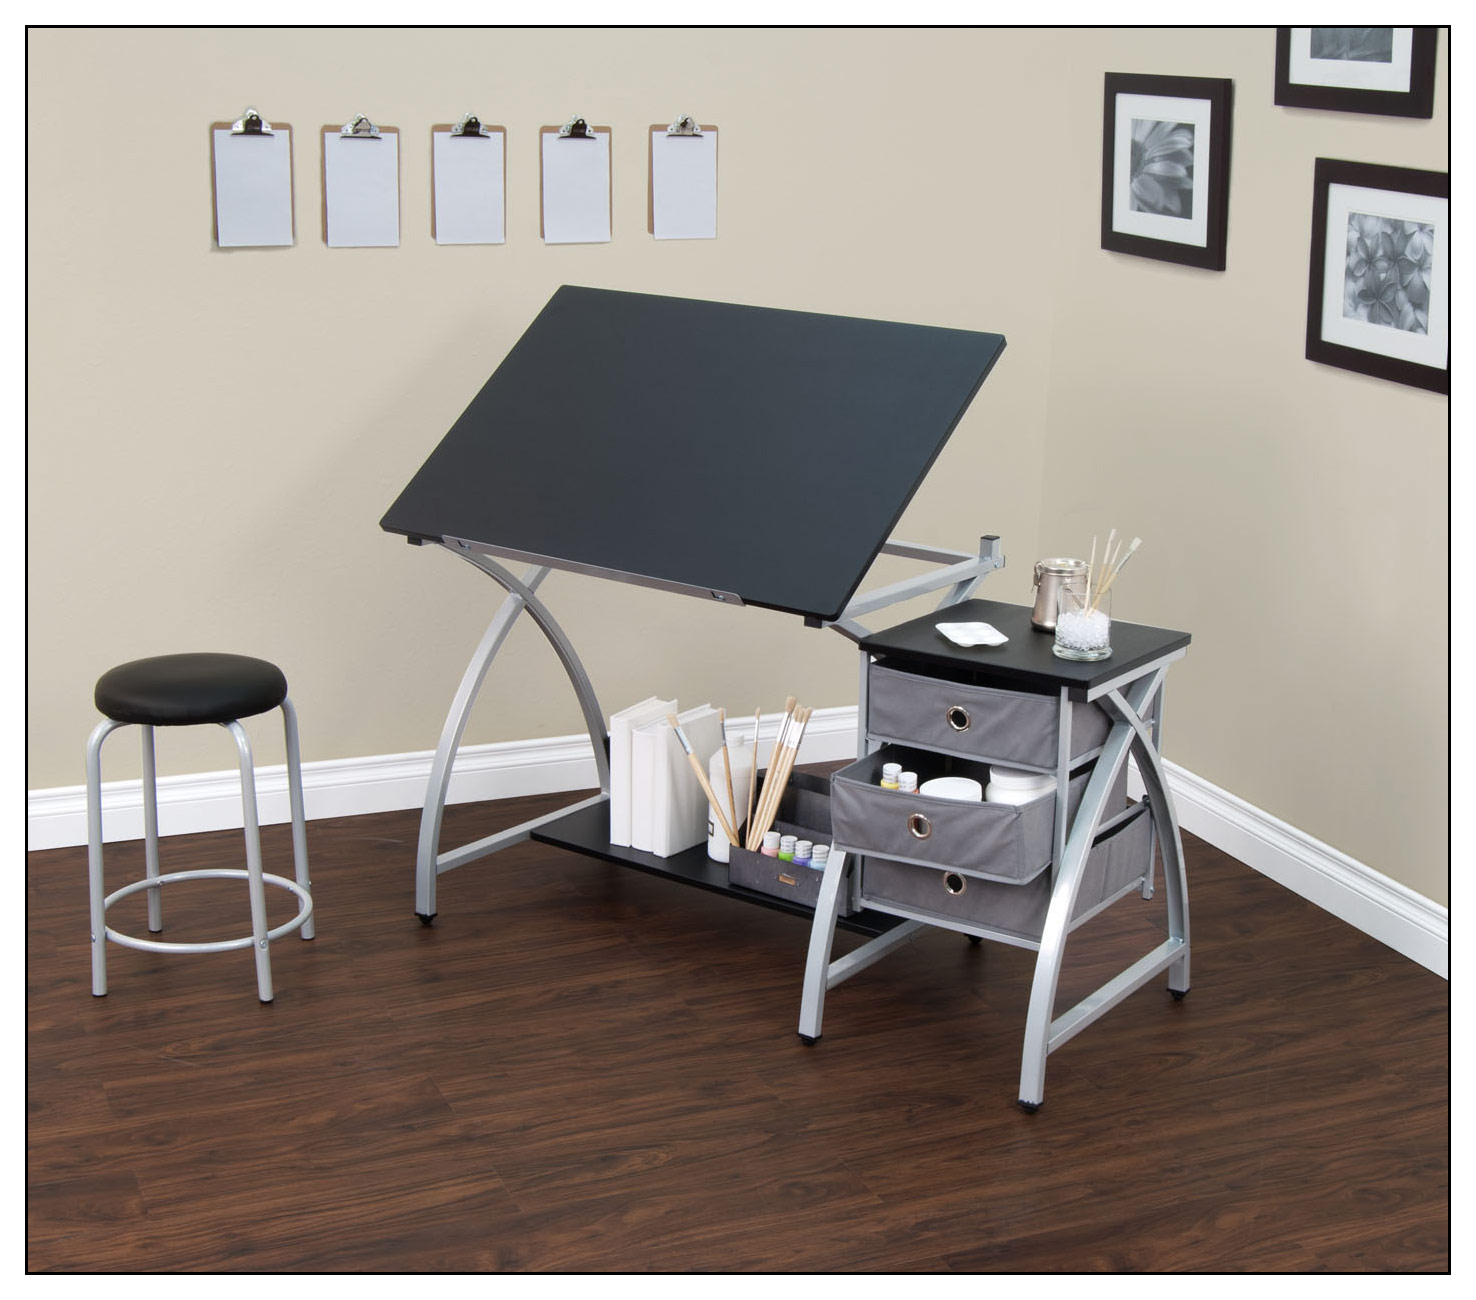 Photo 1 of 2 Piece Comet Art, Hobby, Drawing, Drafting, Craft Table with 36"W x 23.75"D Angle Adjustable Top and Stool in Silver/Black, Assembled Dimensions: 50" W x x 29.5" H
